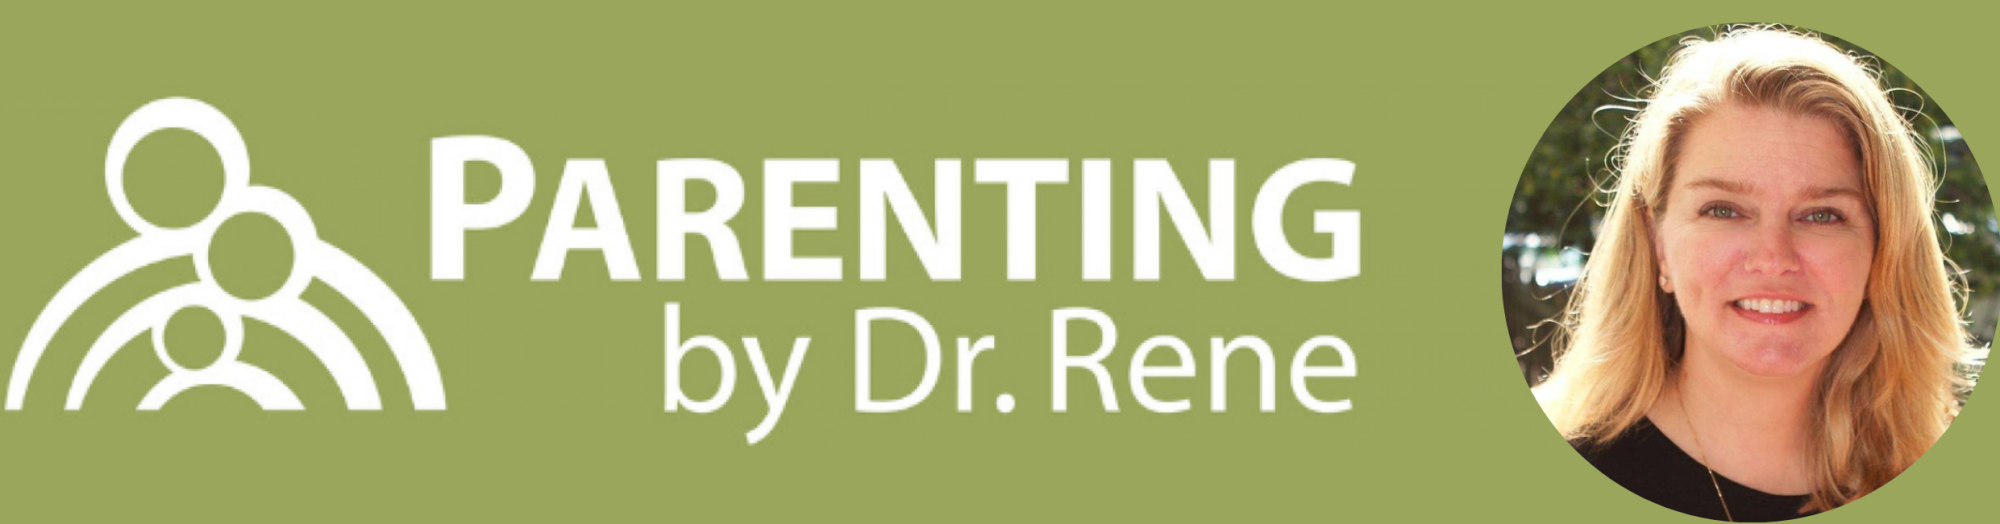 Parenting by Dr. Rene